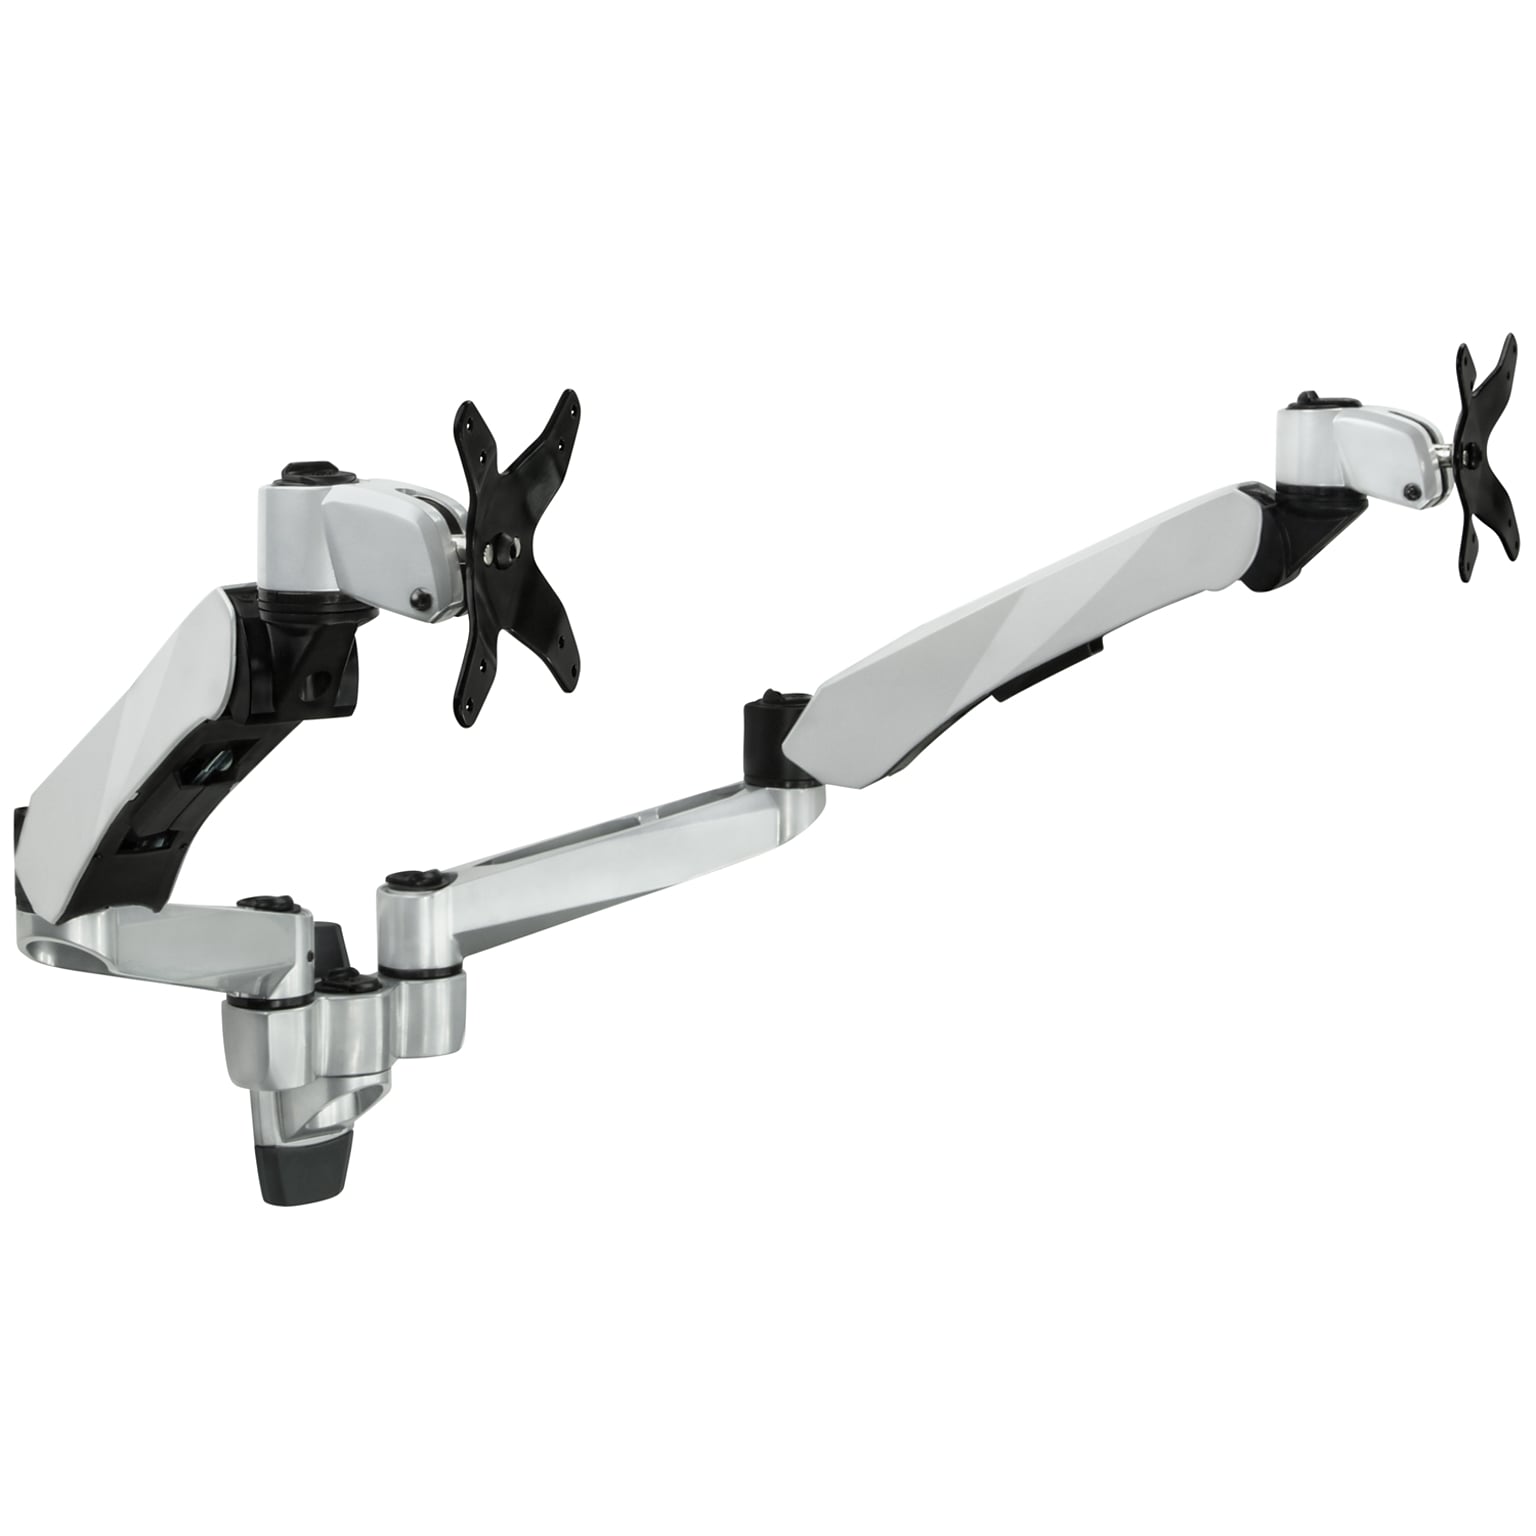 Mount-It! Modular Dual Adjustable Monitor Arms, Up to 30 Monitors, Gray/Silver (MI-45114)